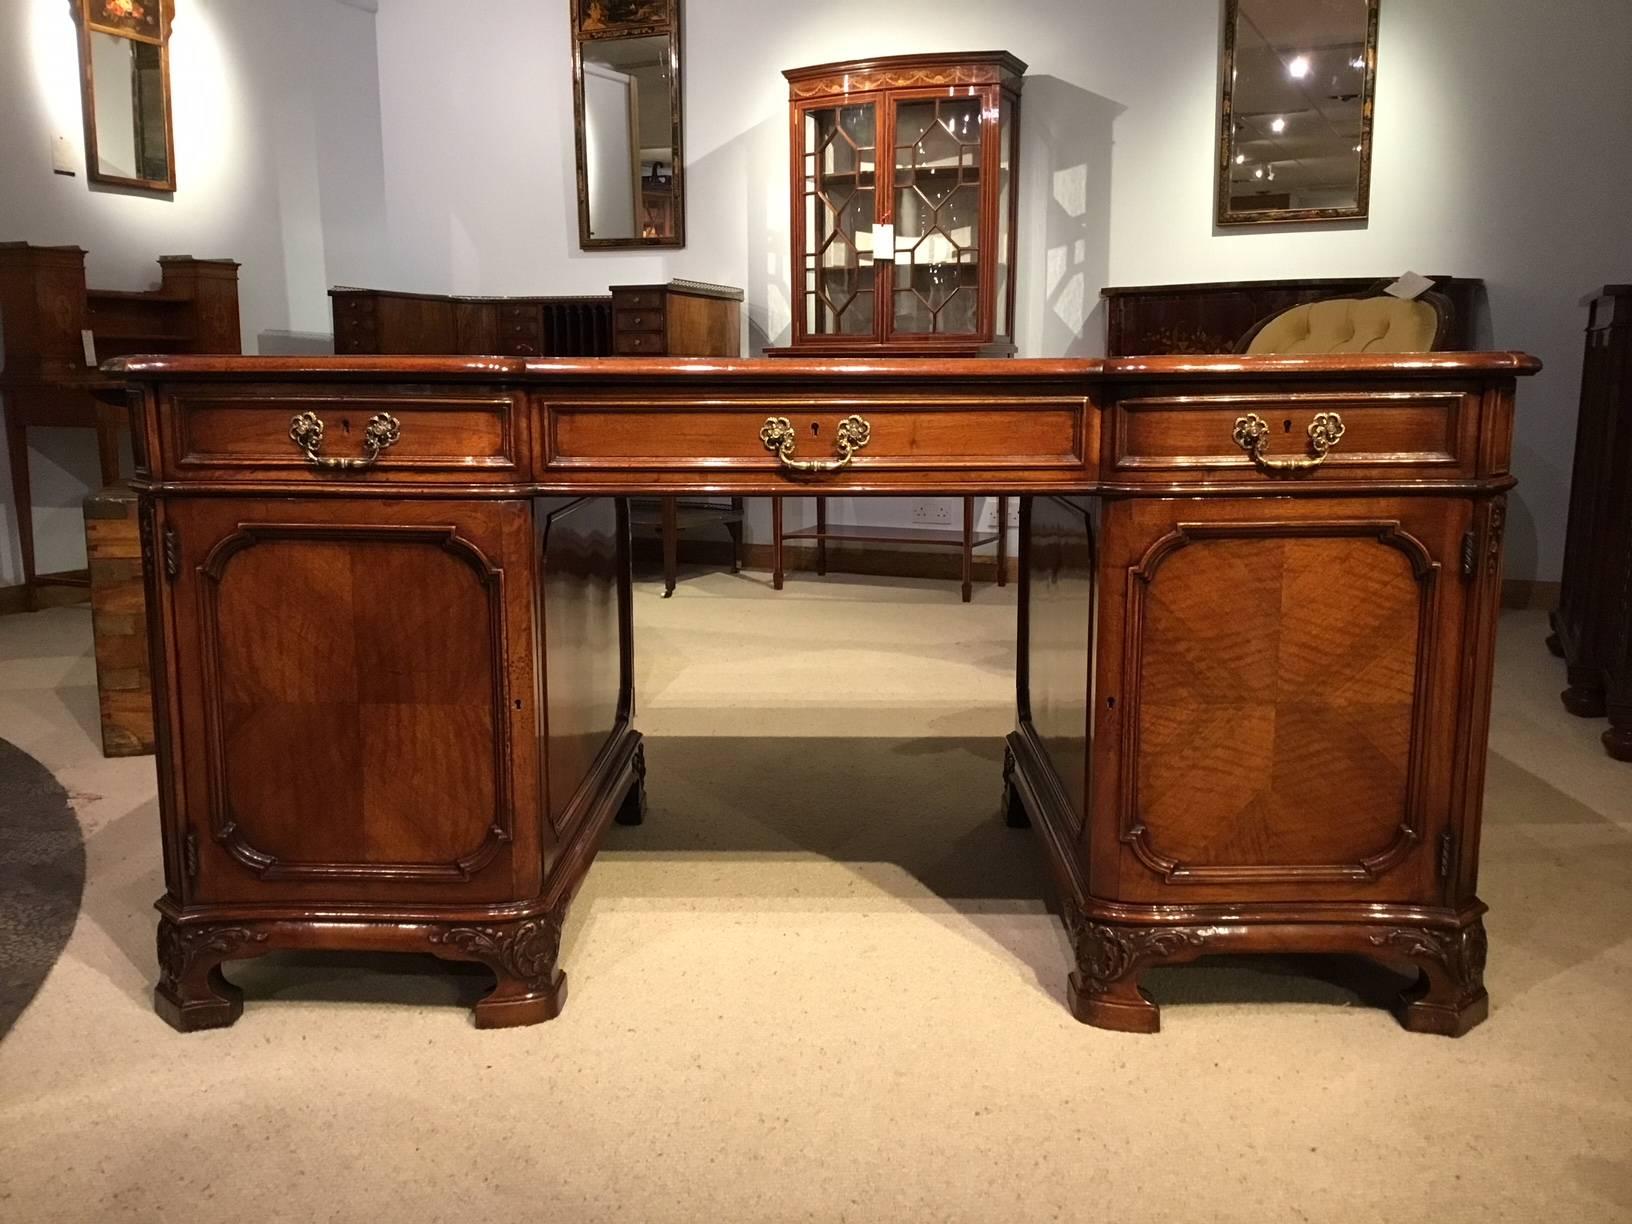 A fine quality figured walnut Edwardian Period pedestal desk. Having a solid walnut top of serpentine outline with a red gilt and blind tooled leather writing insert, above the three rectangular walnut lined drawers with Chippendale style pierced